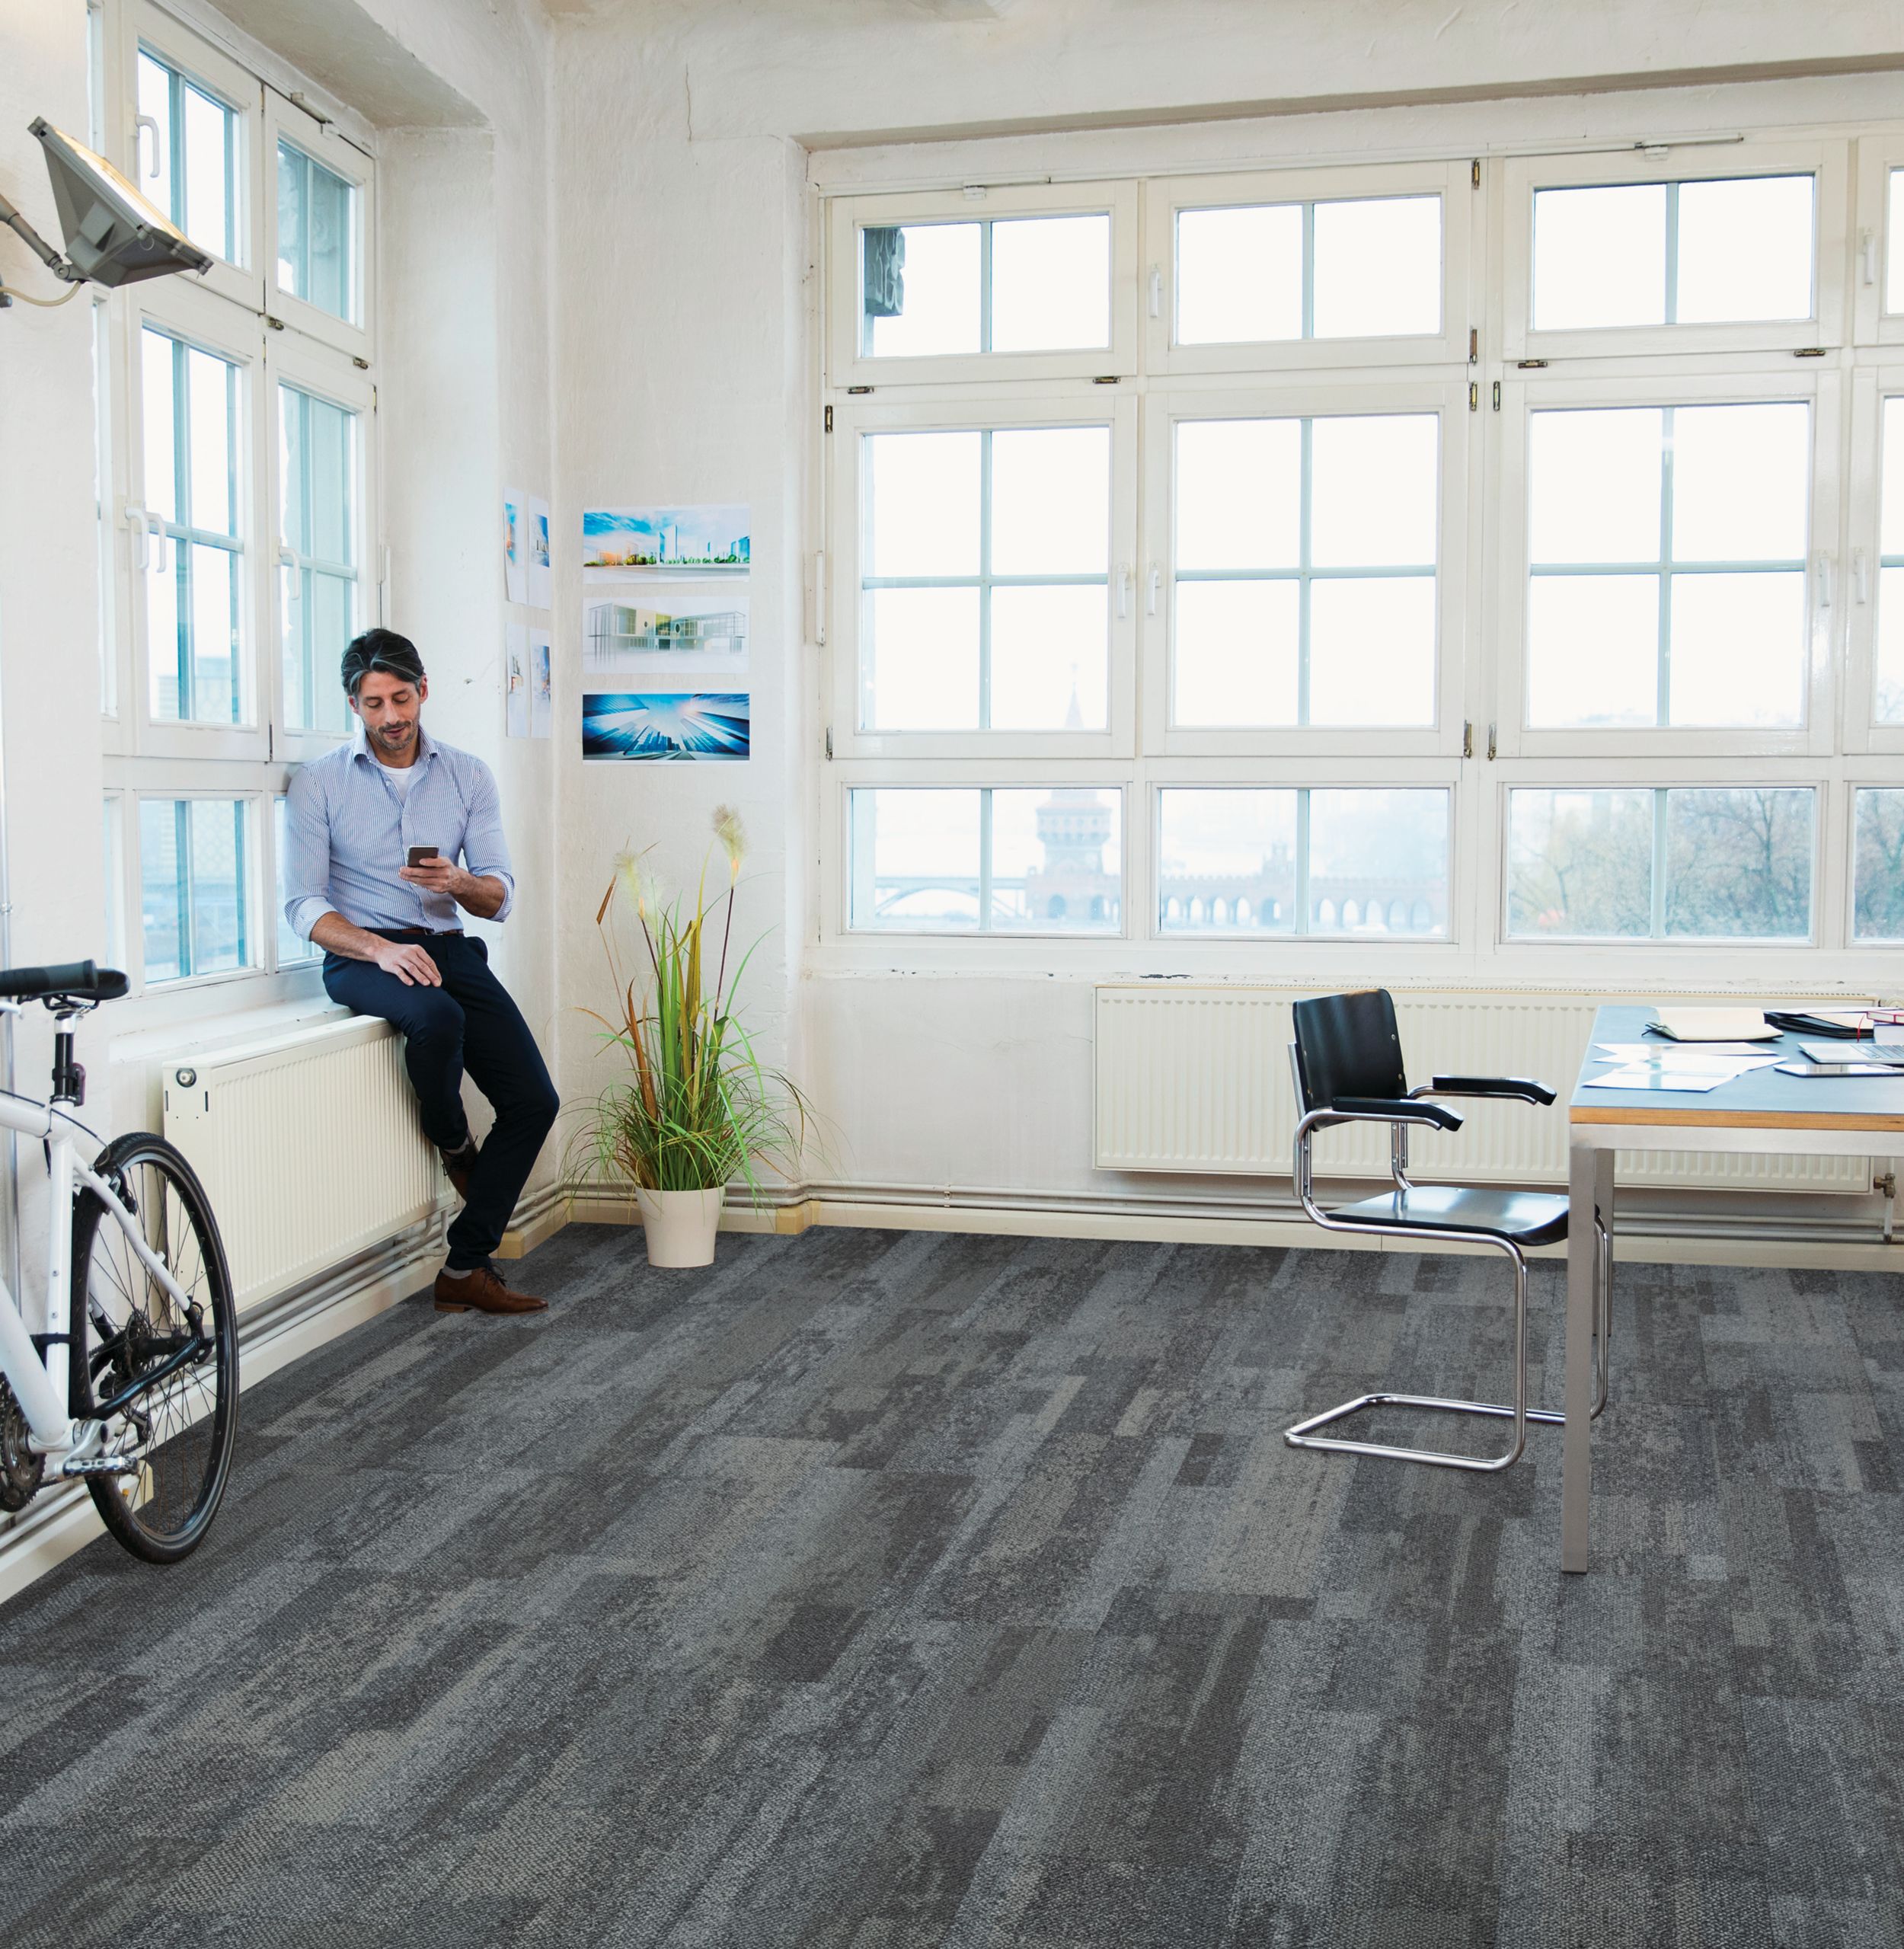 Interface Naturally Weathered plank carpet tile in office space with man looking at phone on window sill imagen número 1